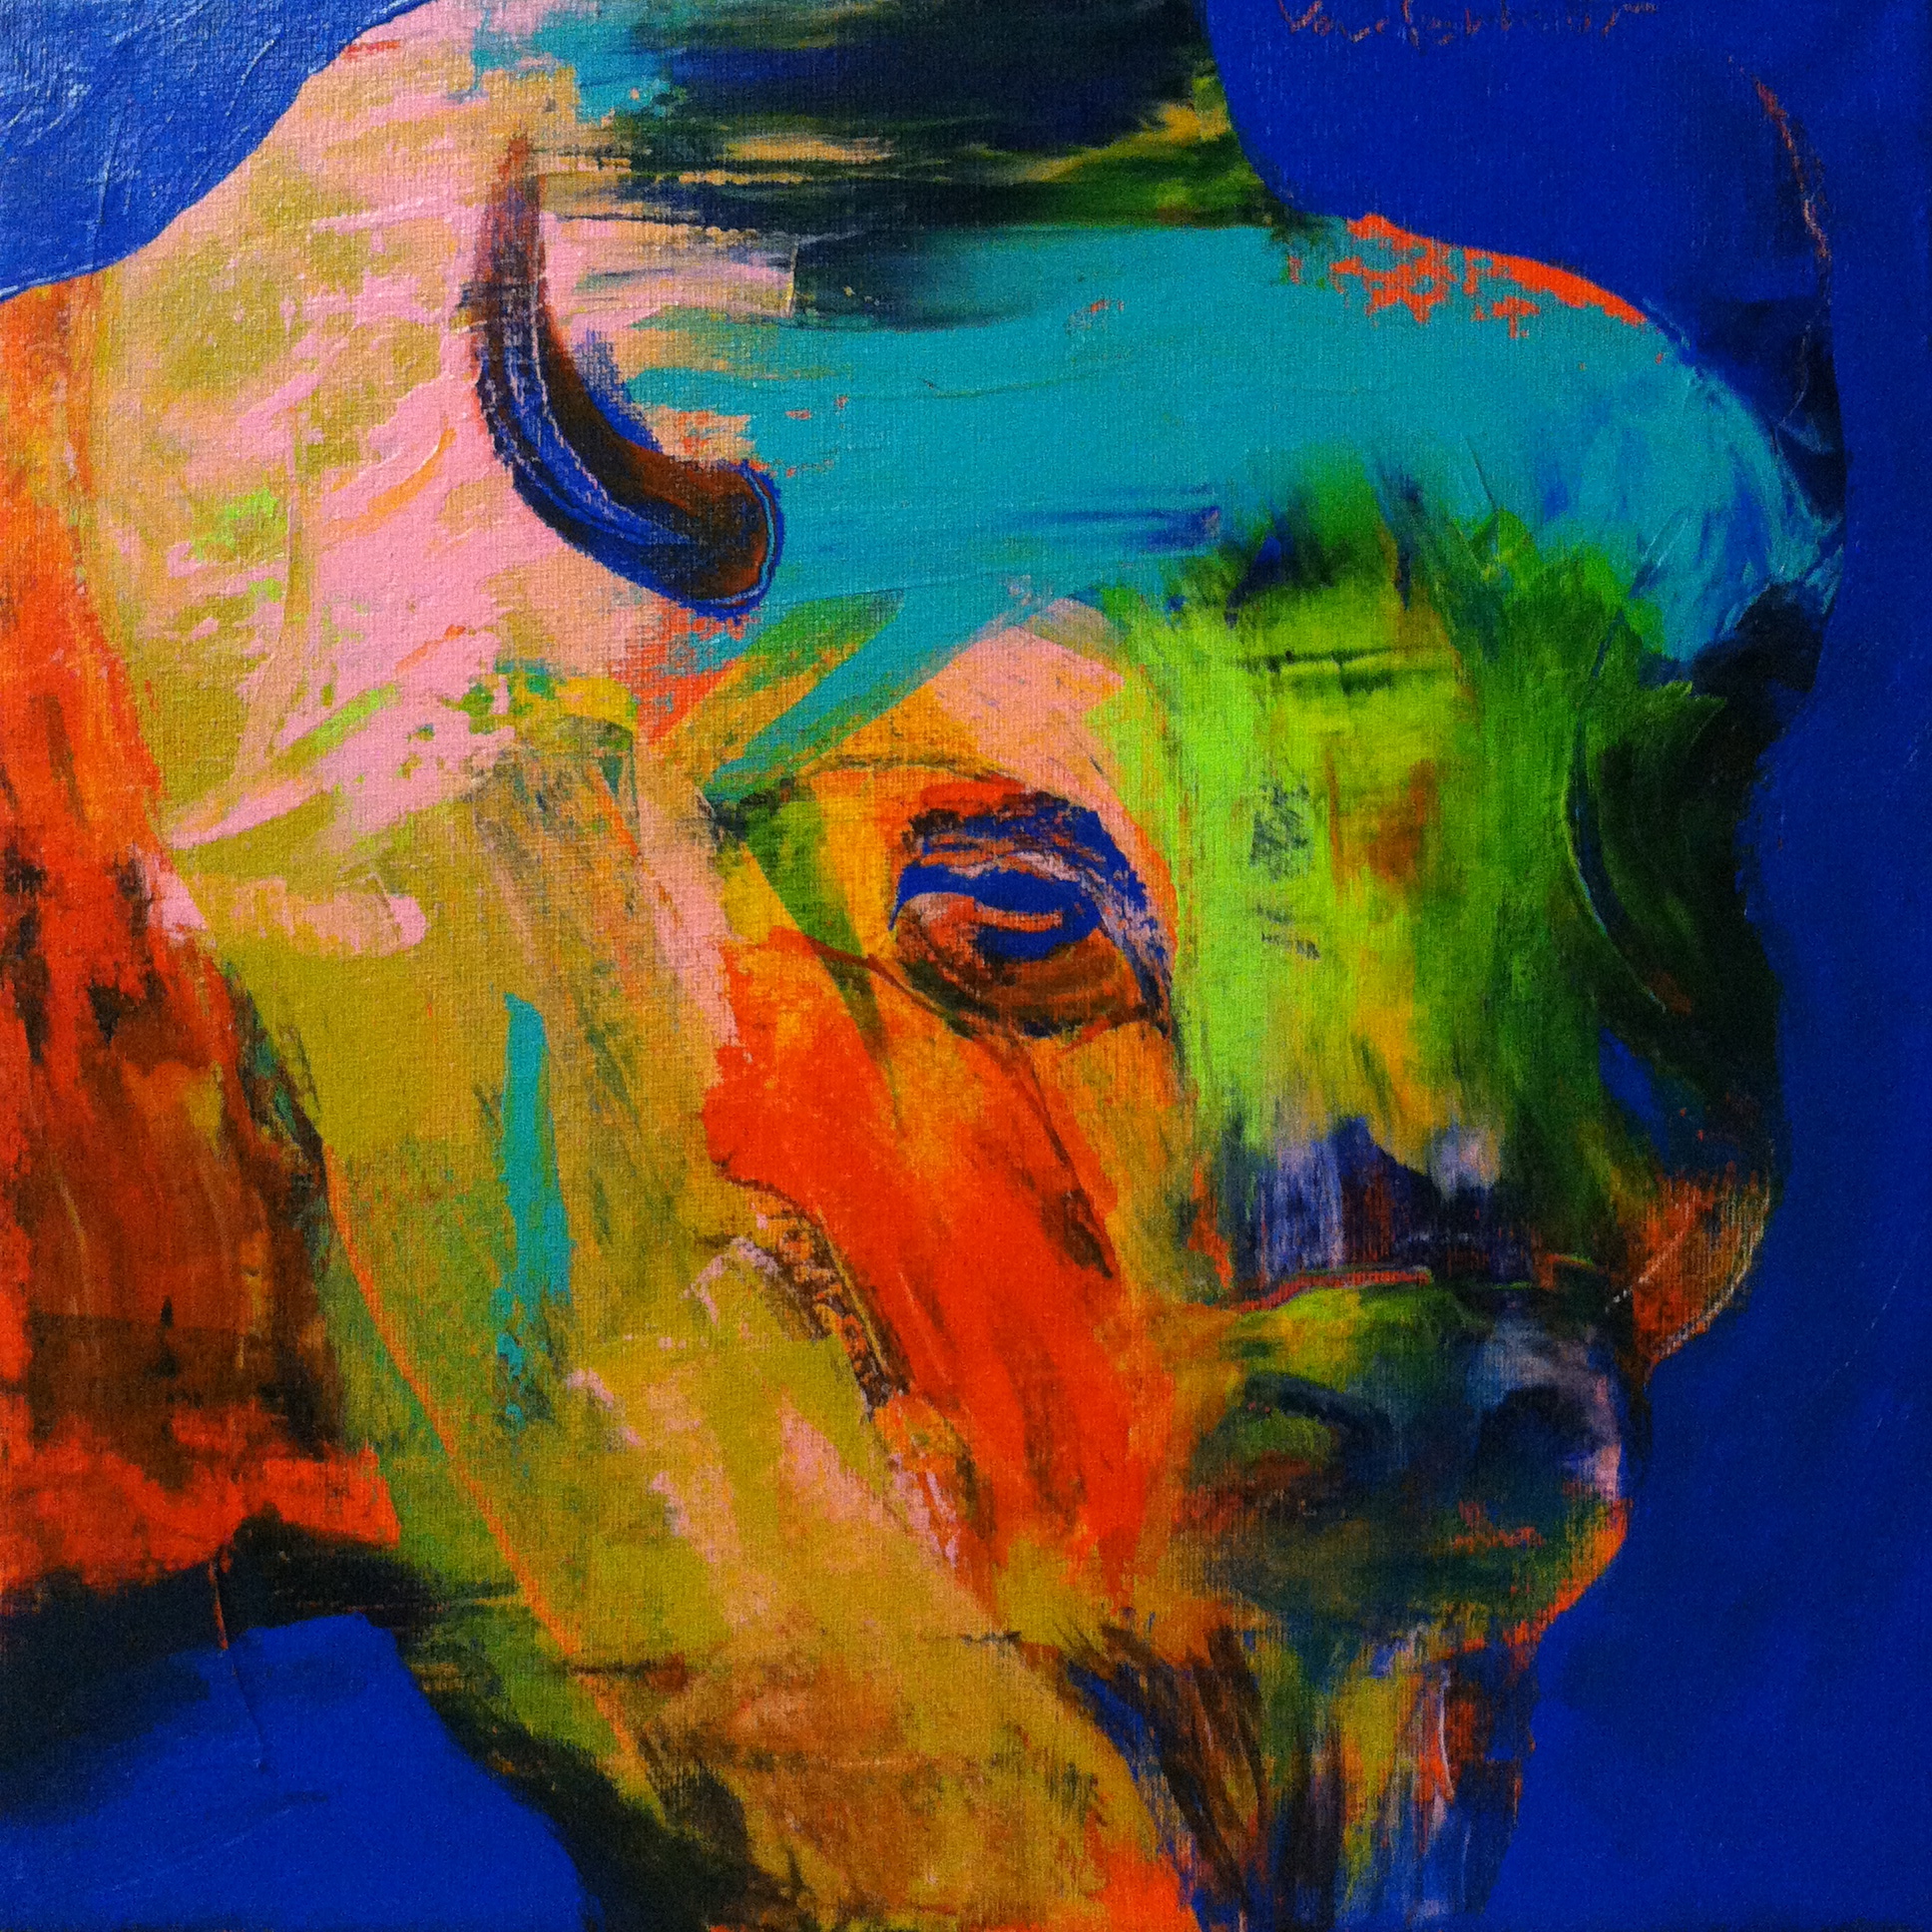  Bison #9, acrylic on canvas, 12x12 inches, 2015 